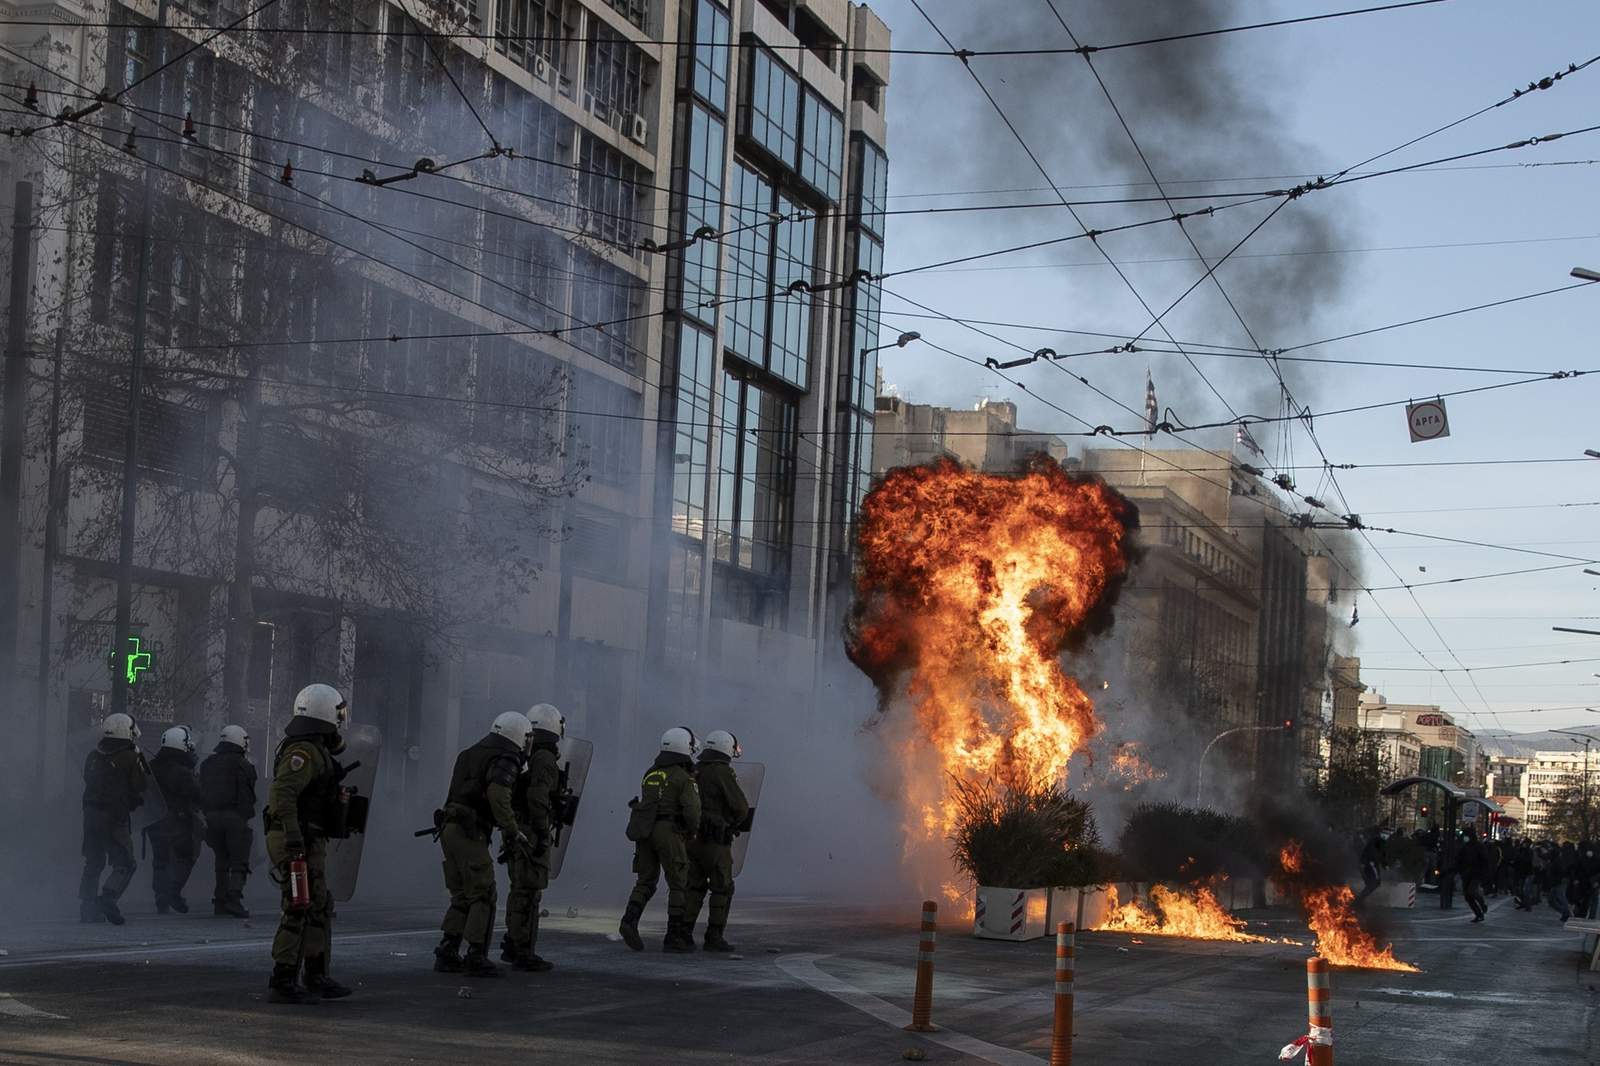 Greece: "Lockdown fatigue" blamed for fueling mass protests